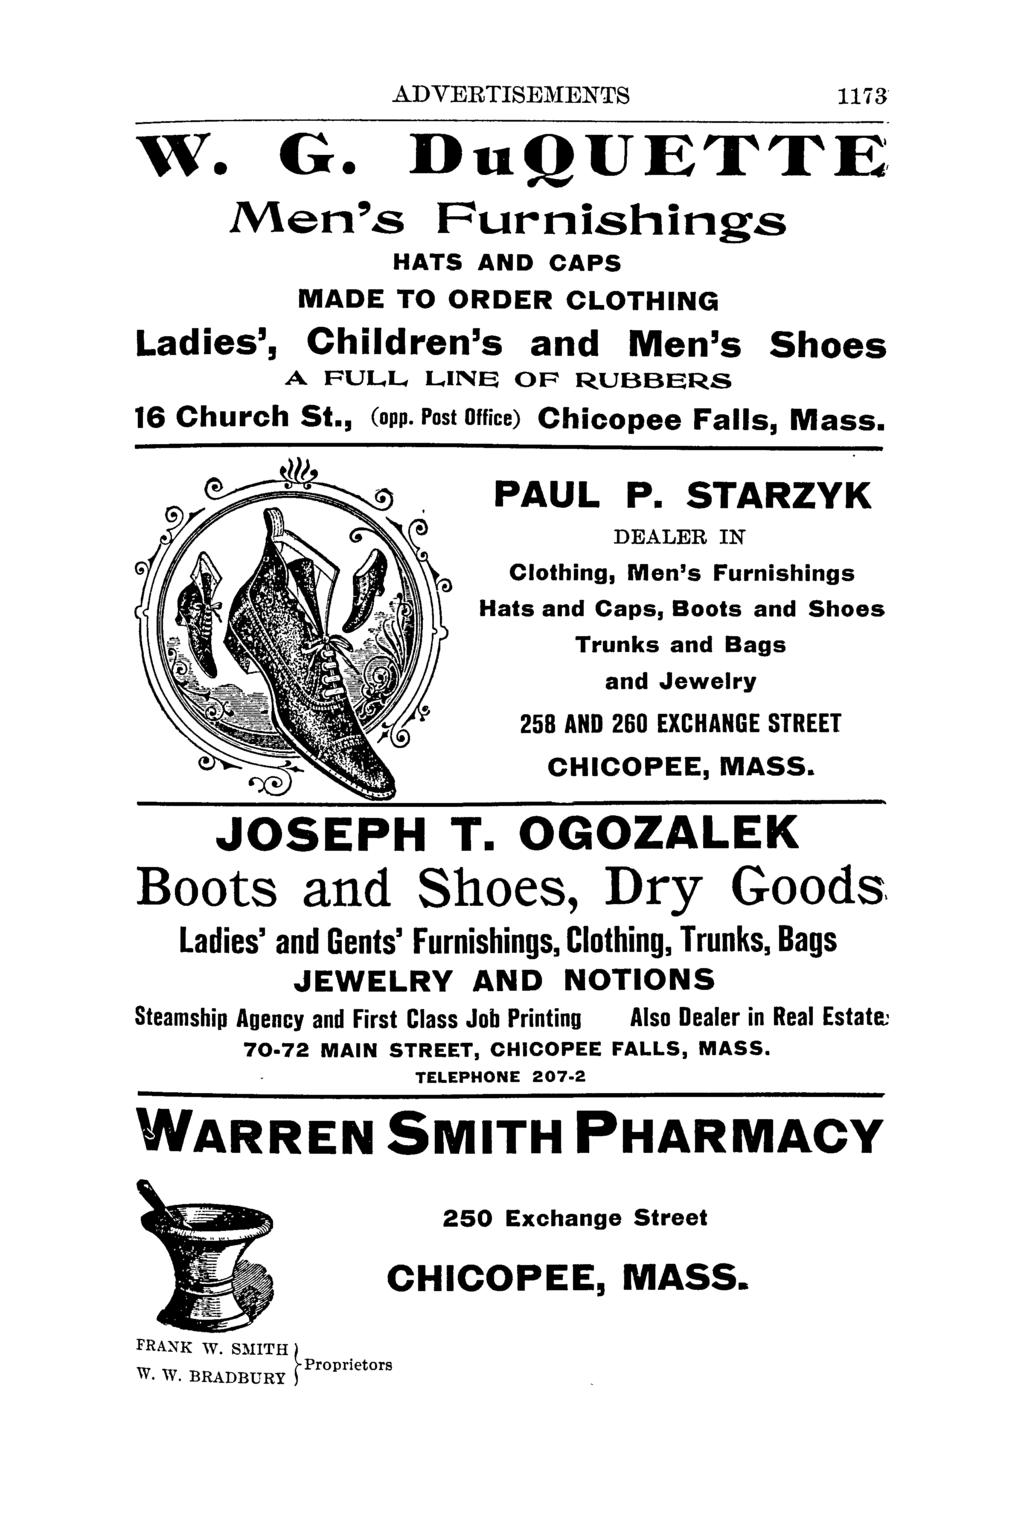 ADVERTISEl\'IENTS 1173 w. G. Du2UETTE. Men's Furnishings HATS AND CAPS MADE TO ORDER CLOTHING Ladies', Children's and Men's Shoes A FUL,L, L,INE OF RUBBERS 16 Church St., (opp.